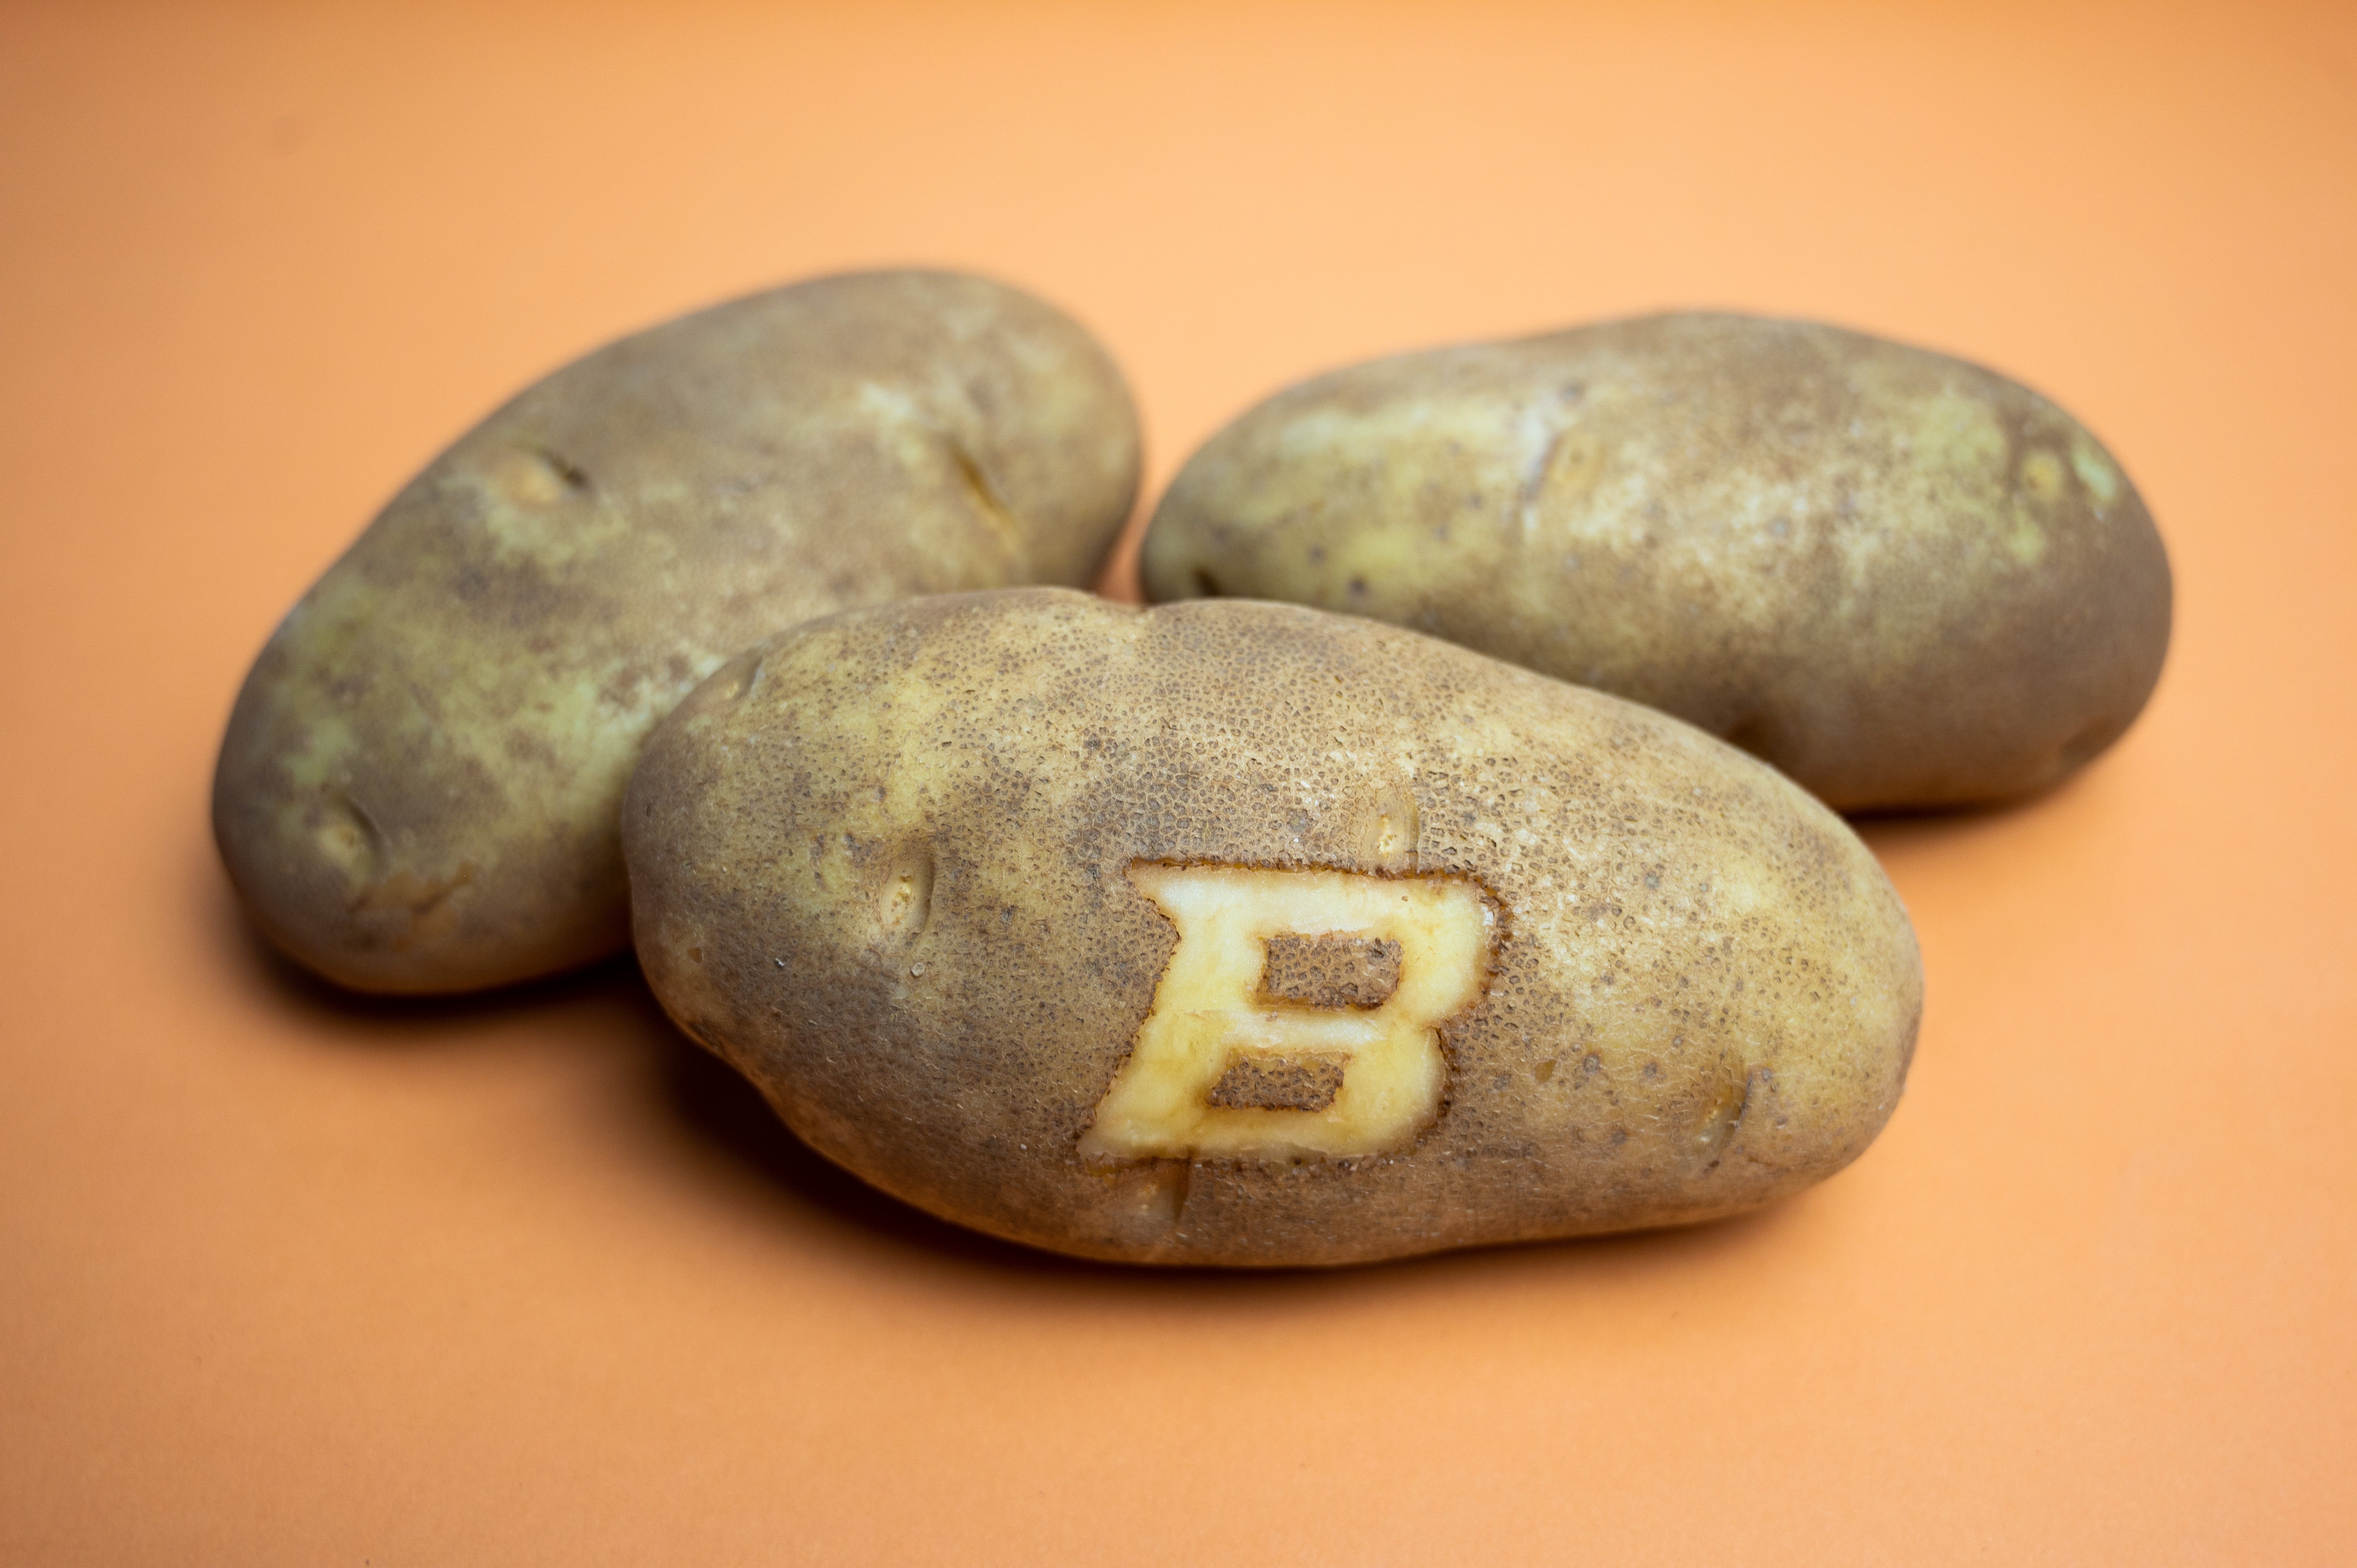 three potatoes and one has a B branded on the front